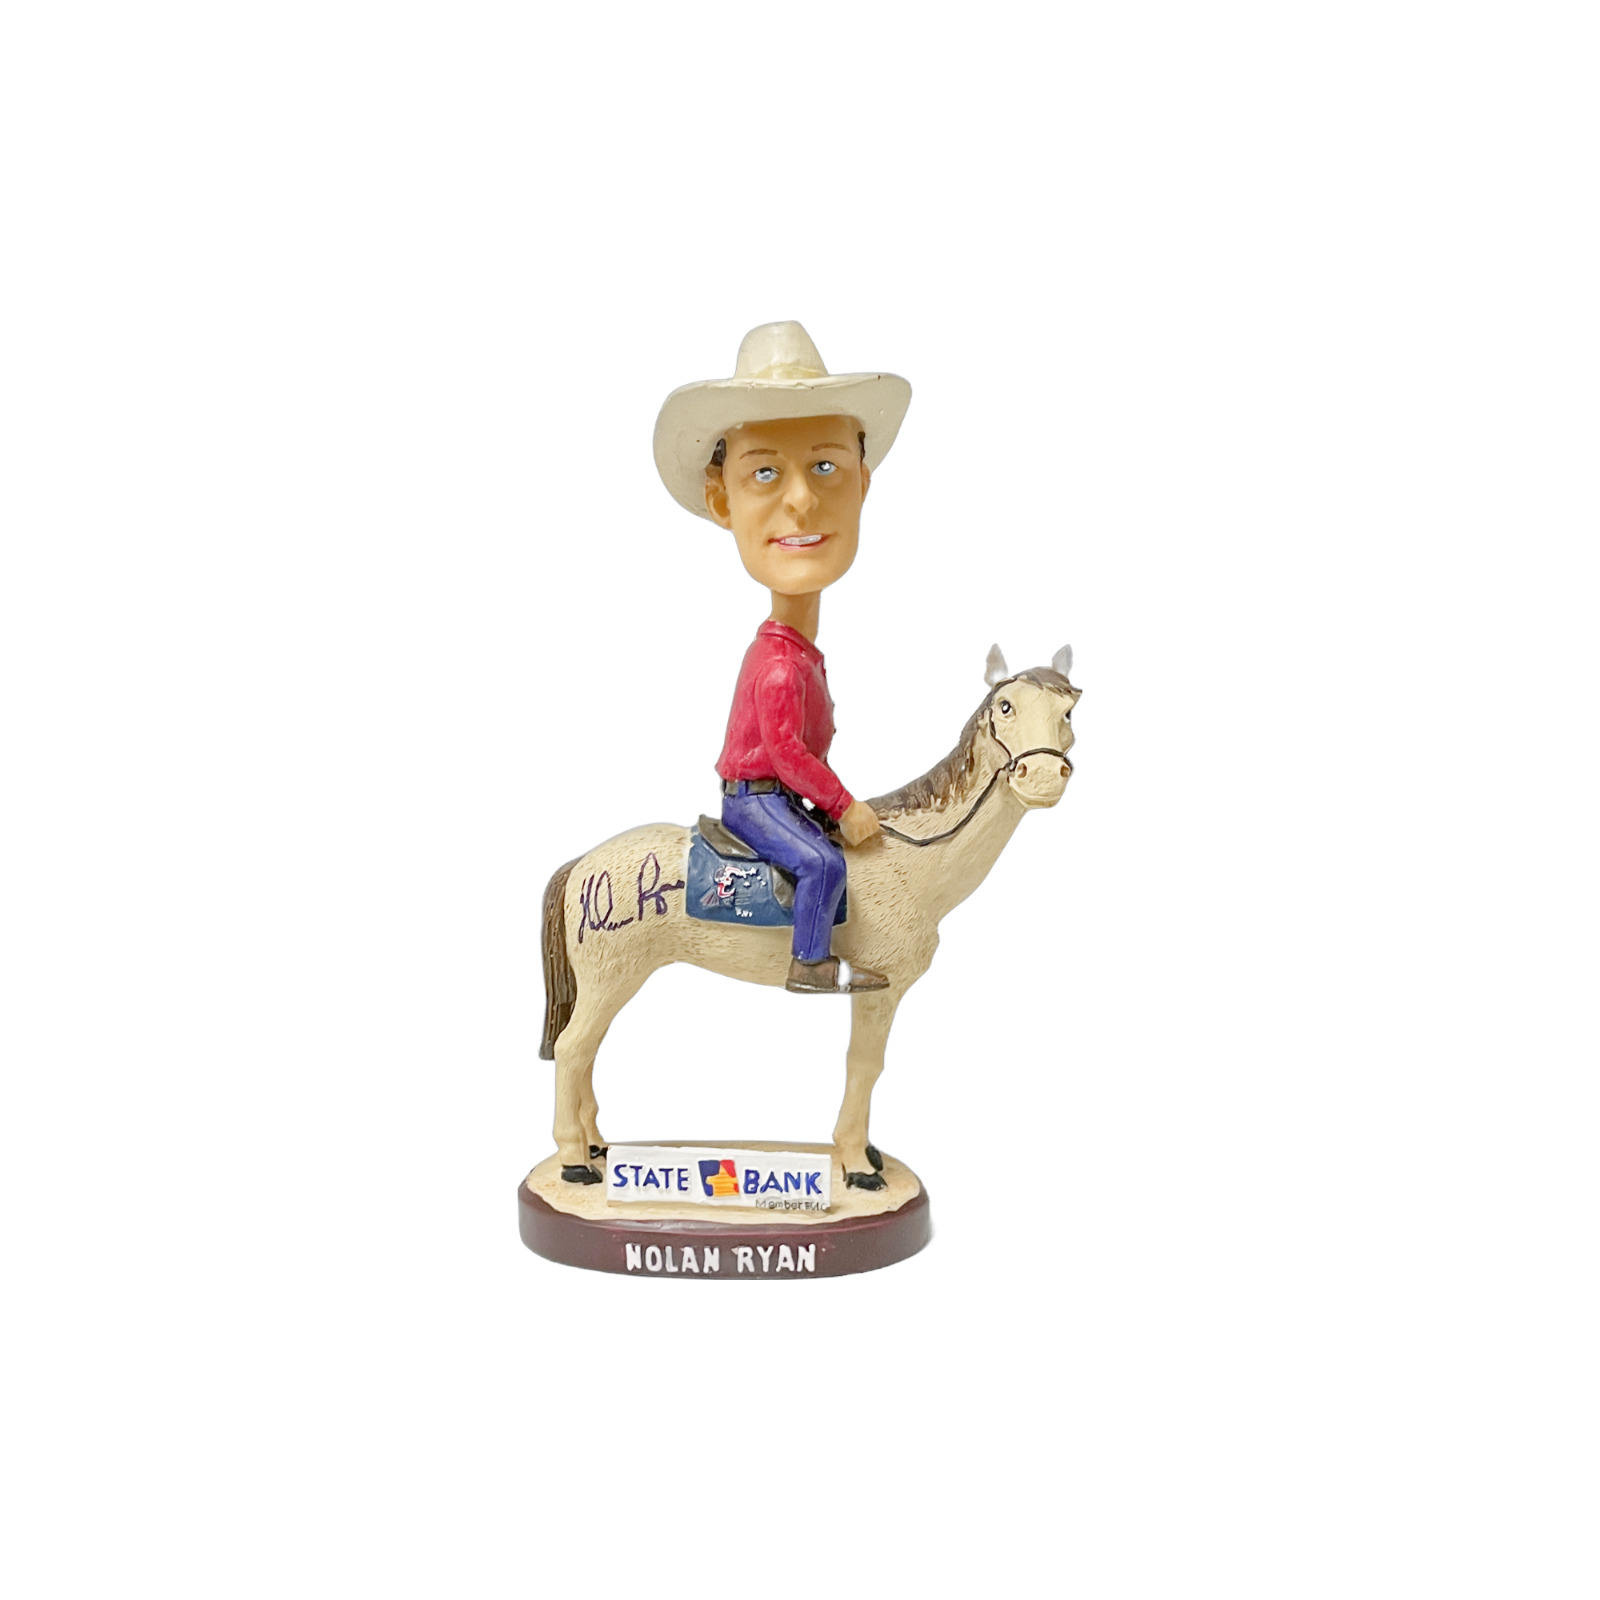 NOLAN RYAN AUTOGRAPHED SIGNED IN WESTERN OUTFIT ON HORSE (STATE FARM)